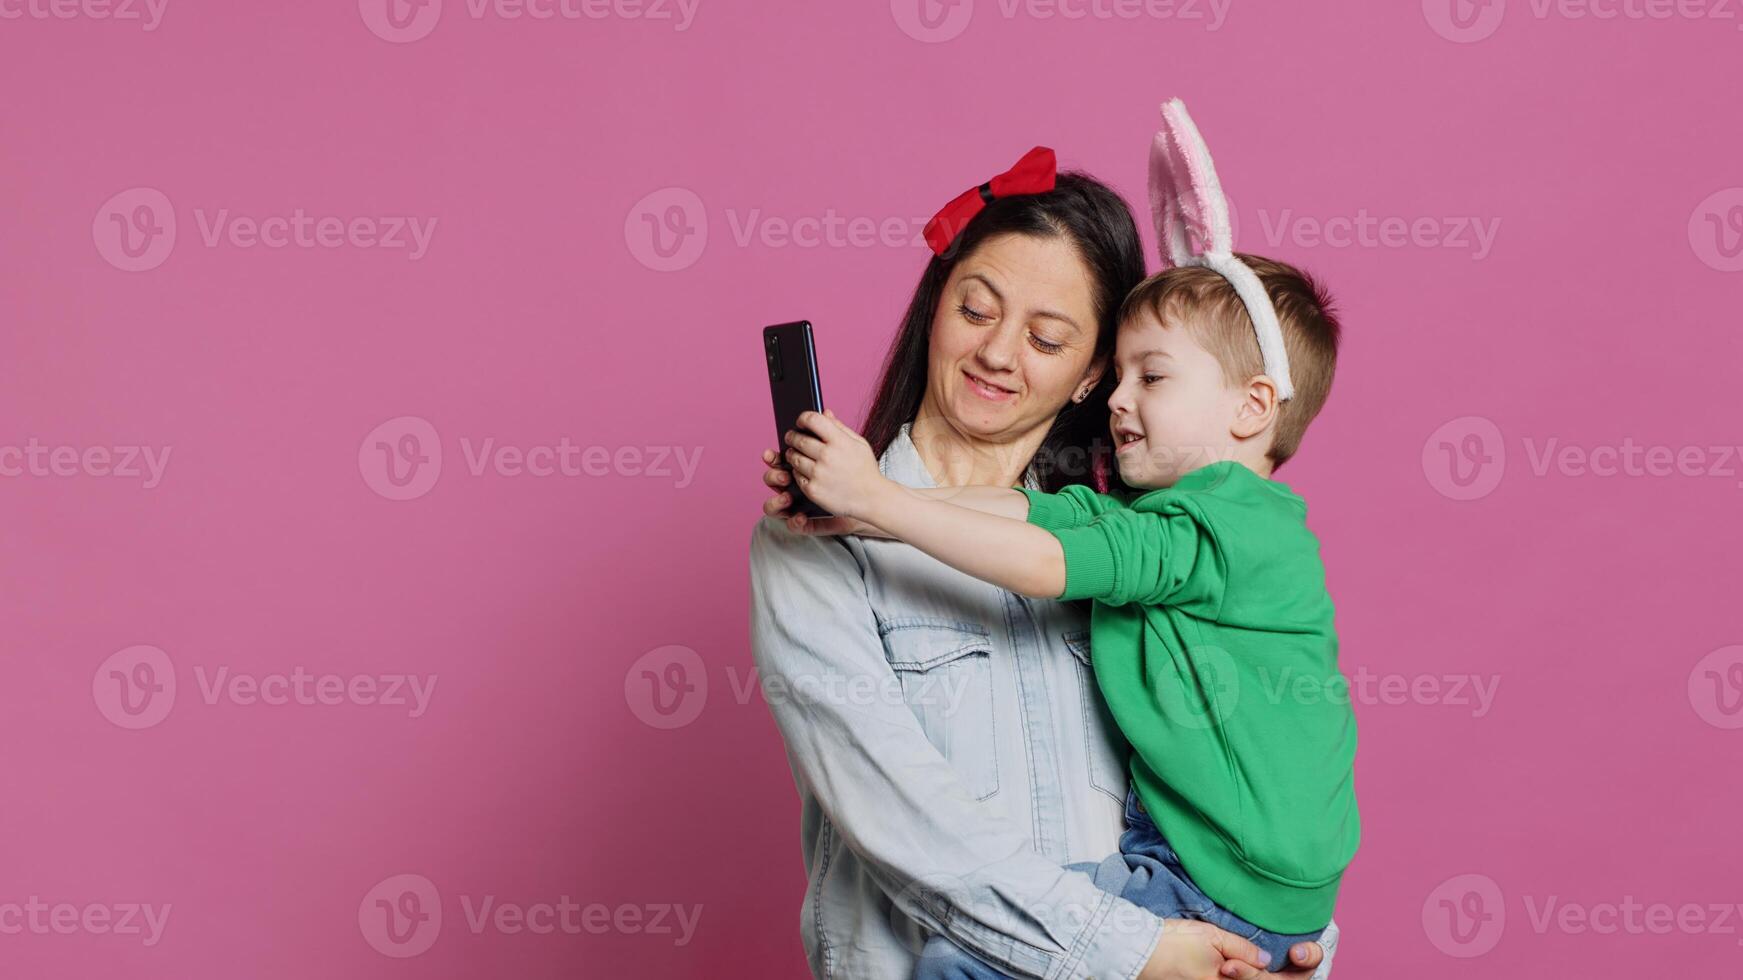 Lovely small child taking pictures with his mother on smartphone, trying to capture fun and cute moments against pink background. Little boy being playful and fooling around with phone. Camera A. photo